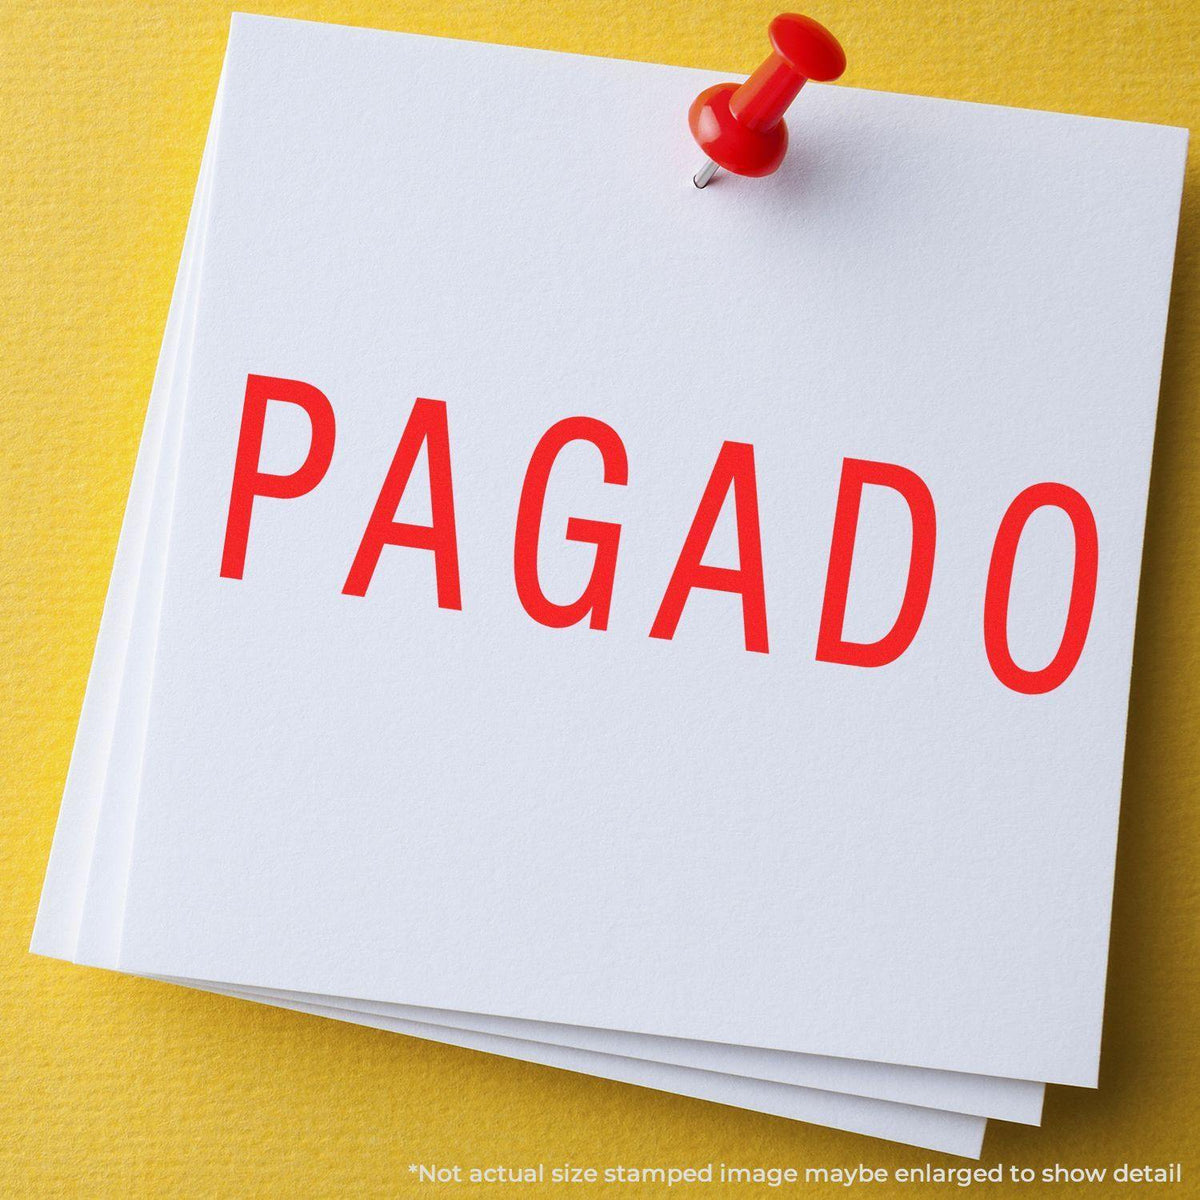 Large Pagado Rubber Stamp In Use Photo